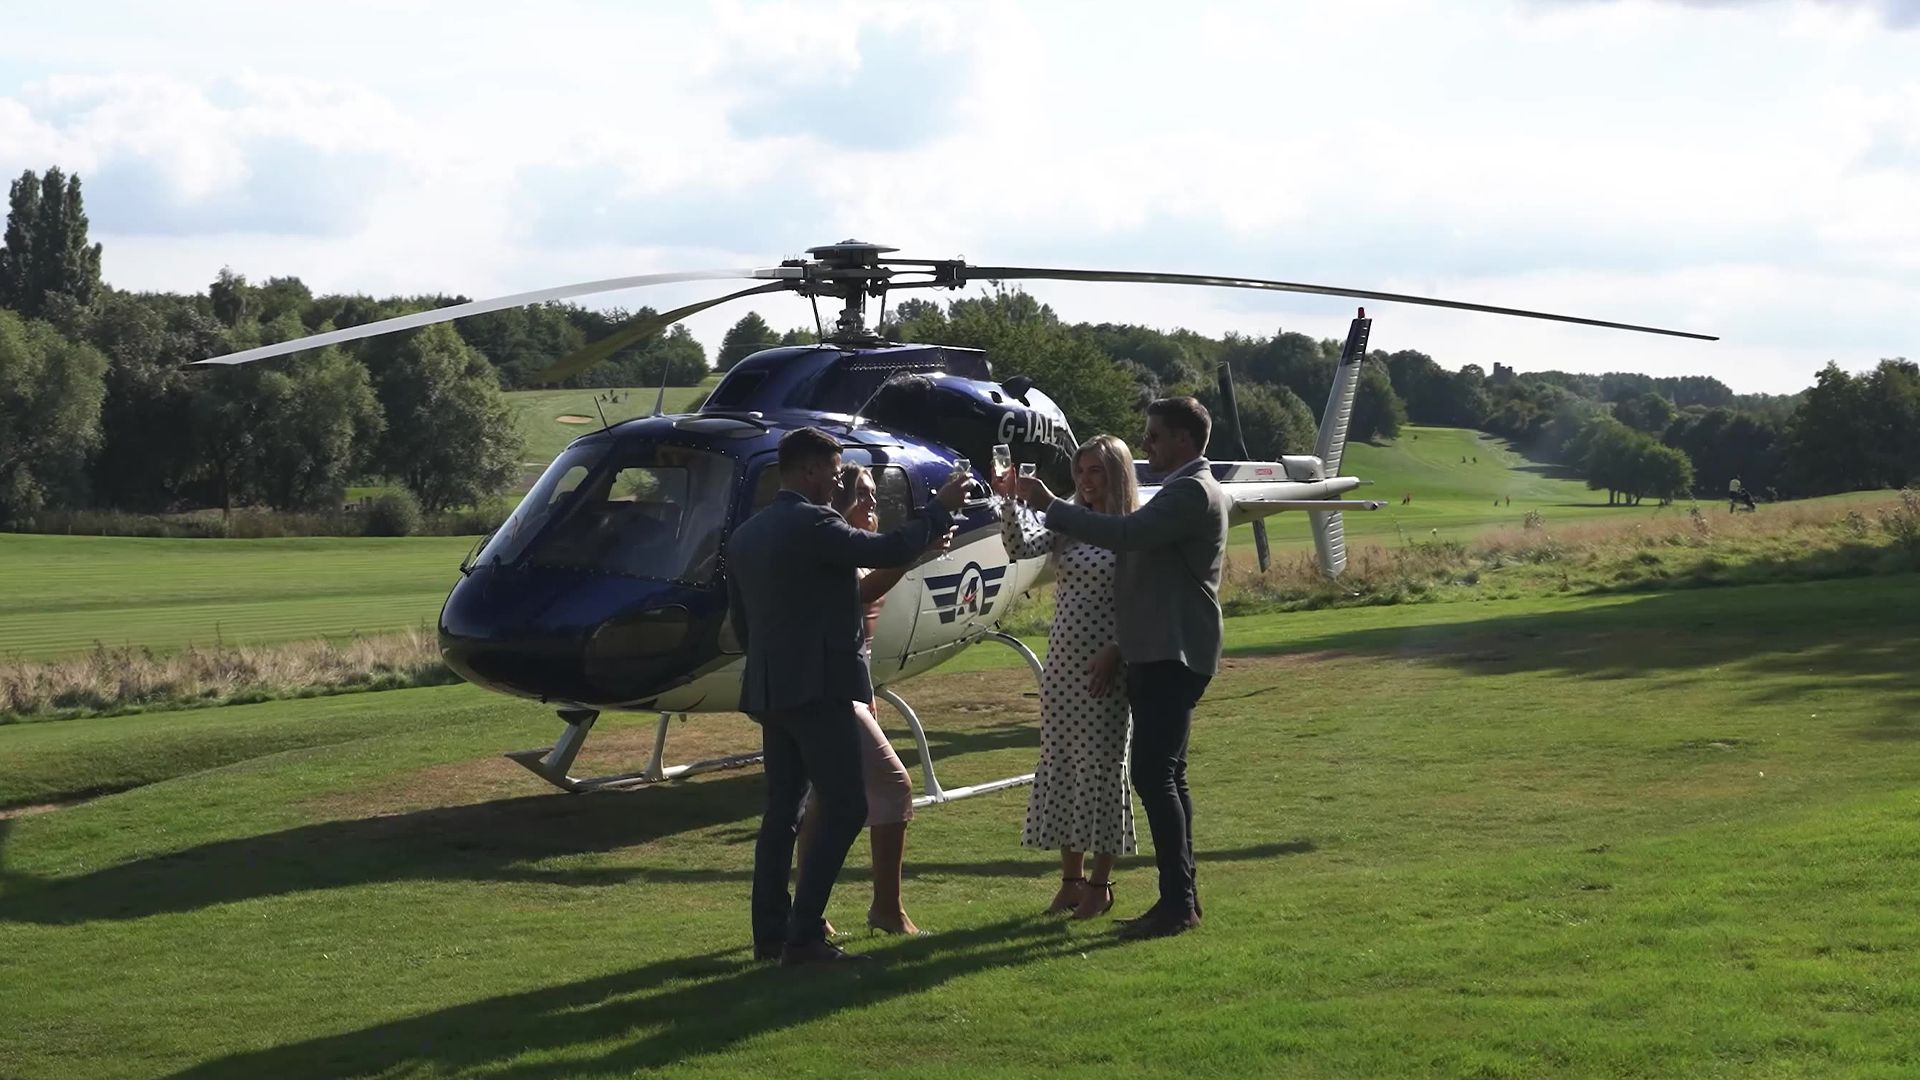 A group of people are standing in front of a helicopter in a field.